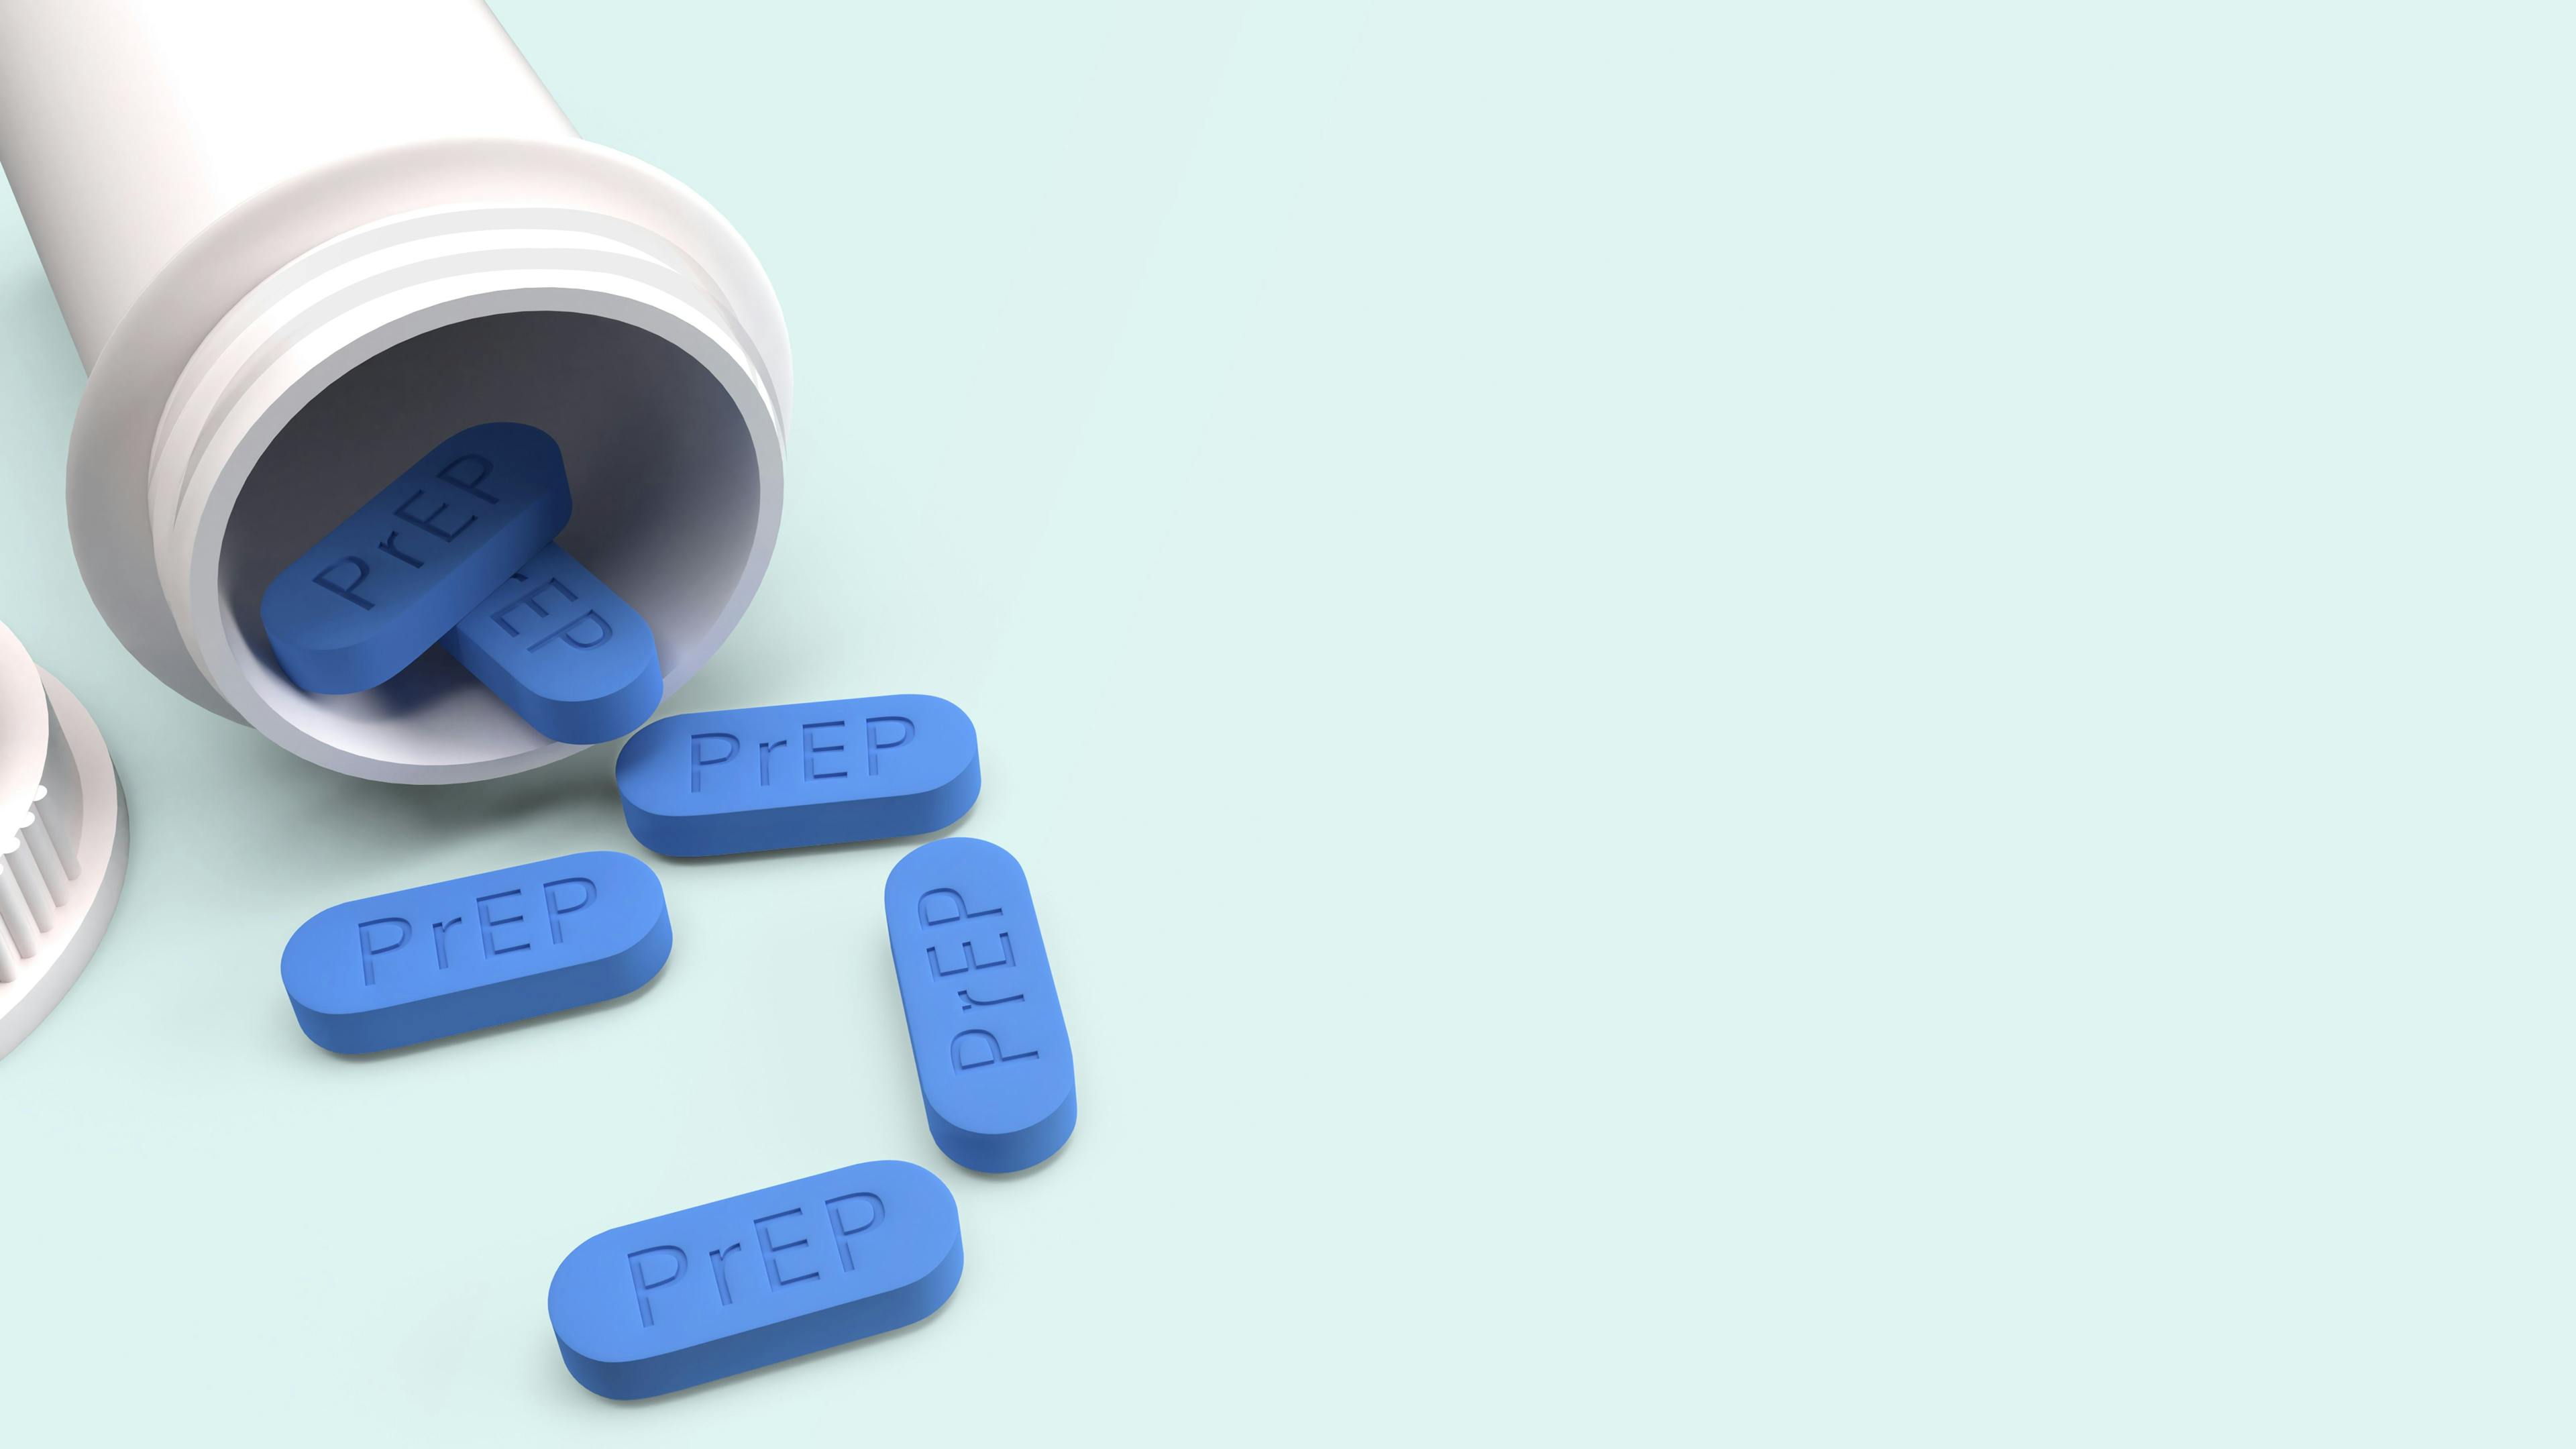 Research findings published in this month's Health Affairs suggest the financial barriers to HIV preexposure prophylaxis (PrEP) are lowered because health insurance has expanded and the cost of PrEP has declined with the introduction of generic version of Truvada

© niphon stock.adobe.com